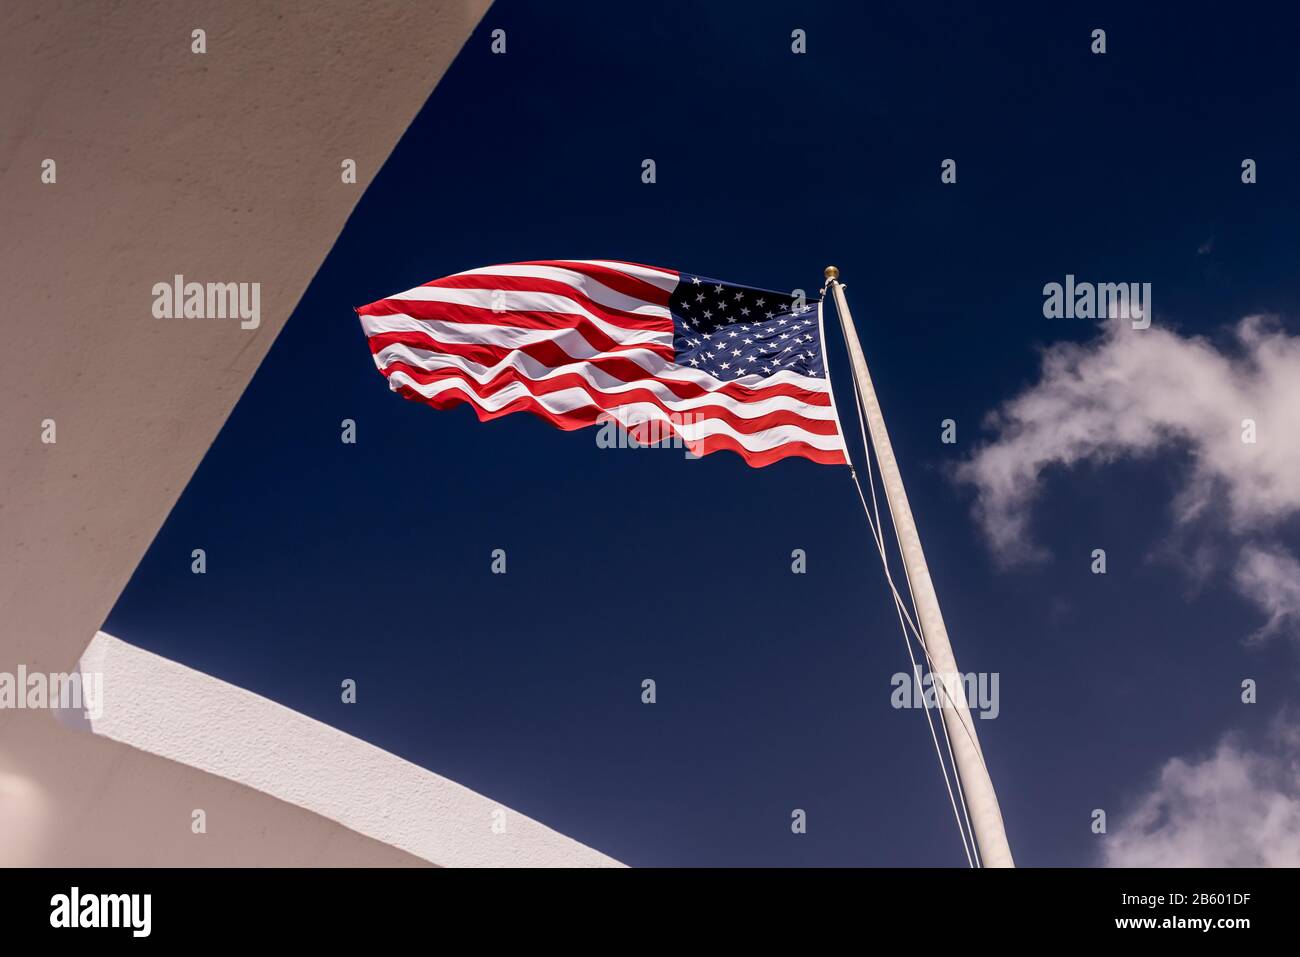 American flag blowing in the wind over the USS Arizona Memorial at Pearl Harbour, Hawaii Stock Photo